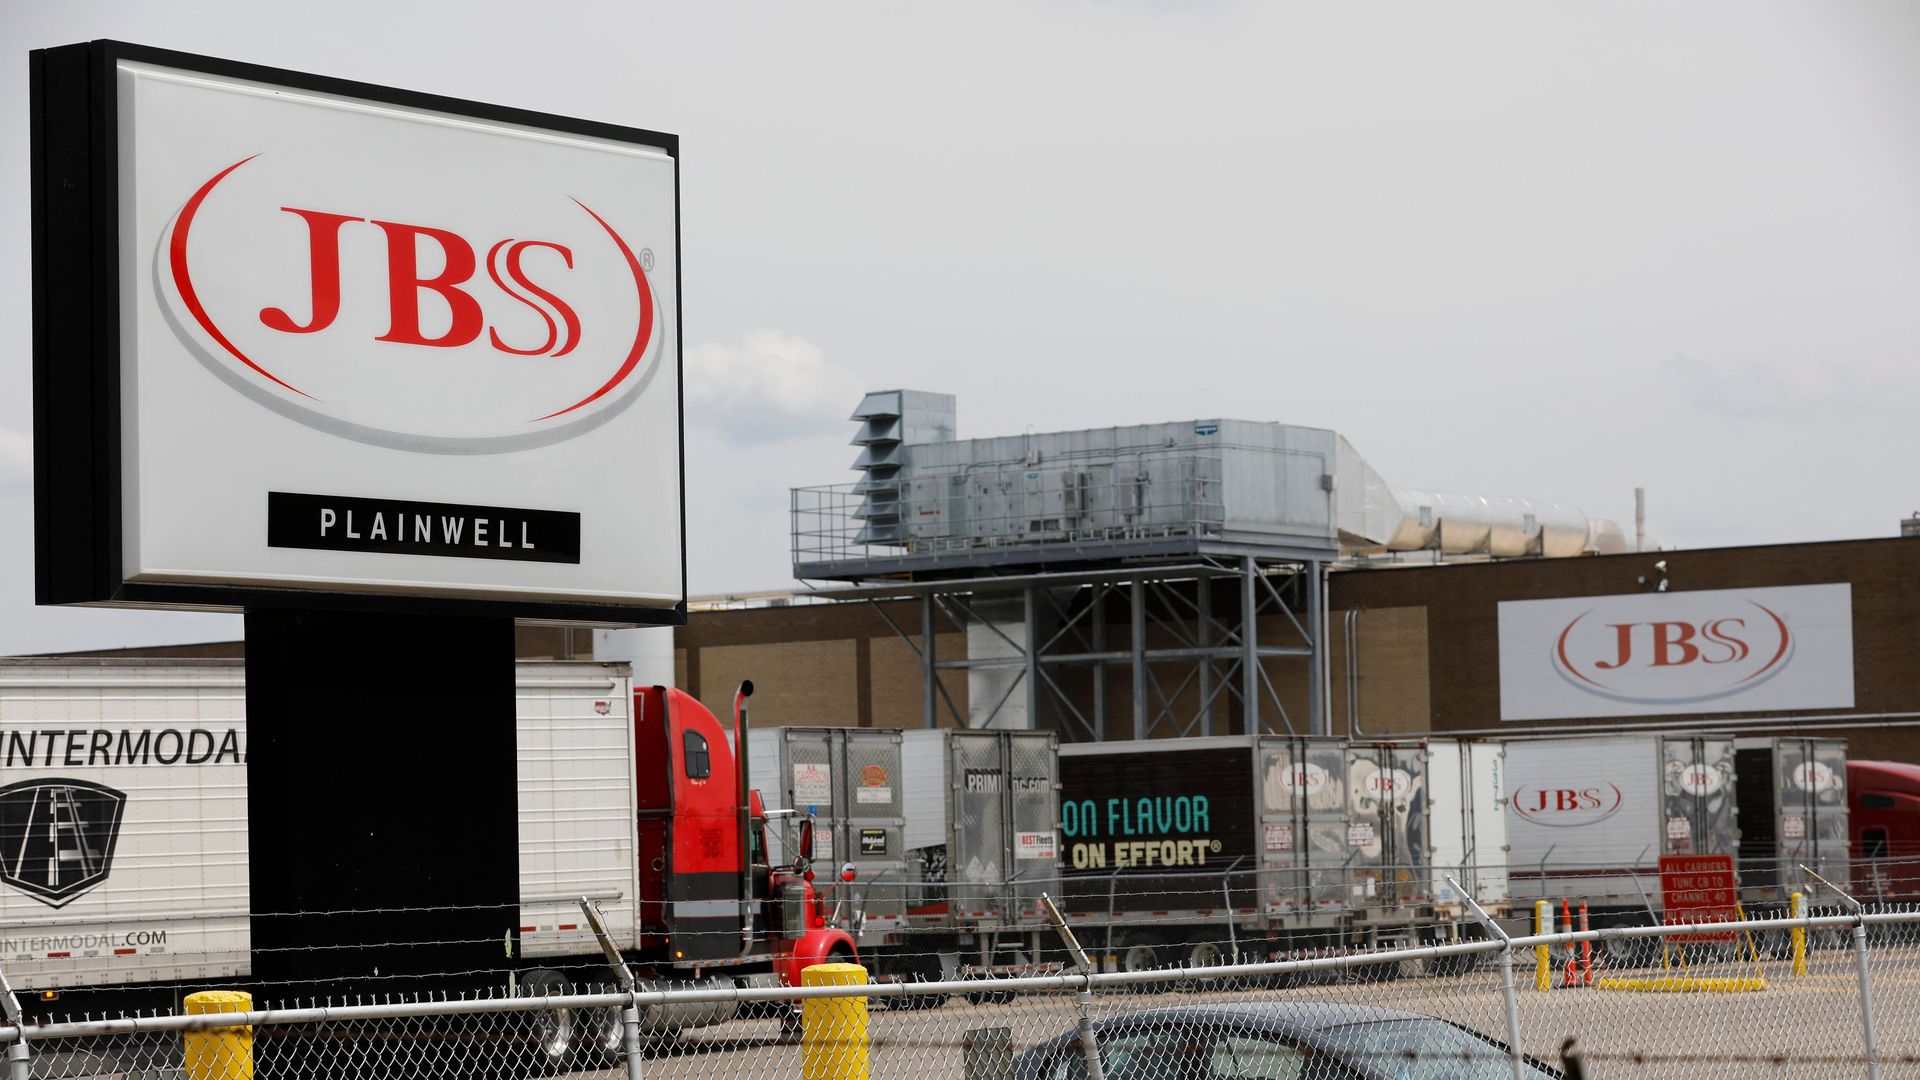 An American subsidiary of Brazilian meat processor JBS told the US government that it has received a ransom demand in a cyberattack it believes originated in Russia